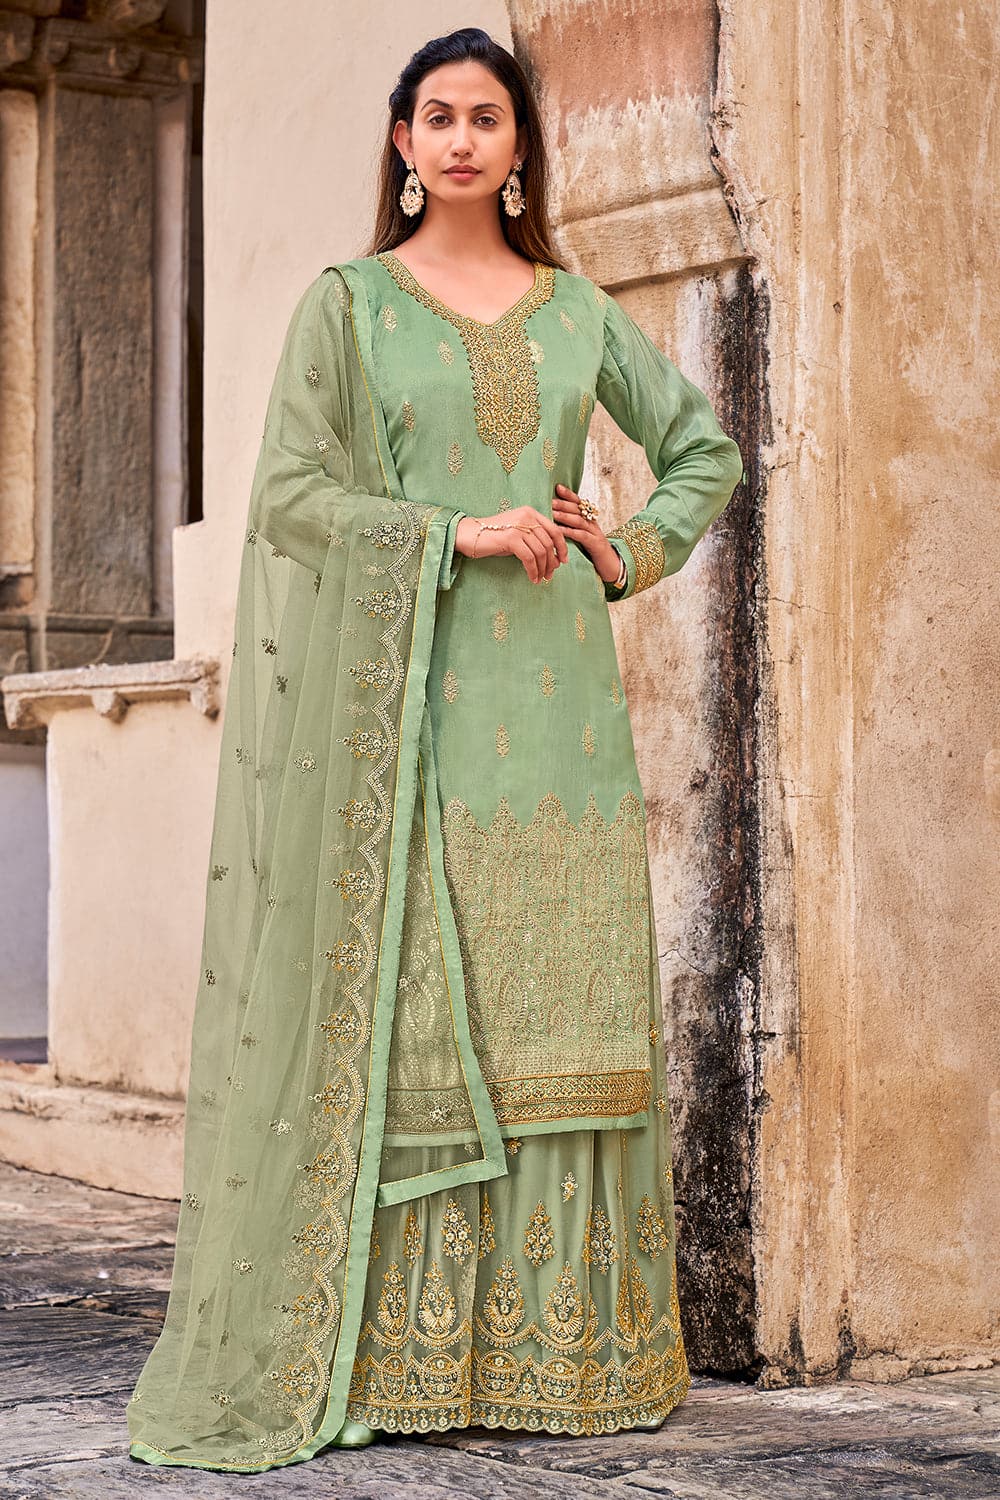 LILY Ombre Chudidar Sleeves Suit Set - ILMA ombre mulmul anarkali suit